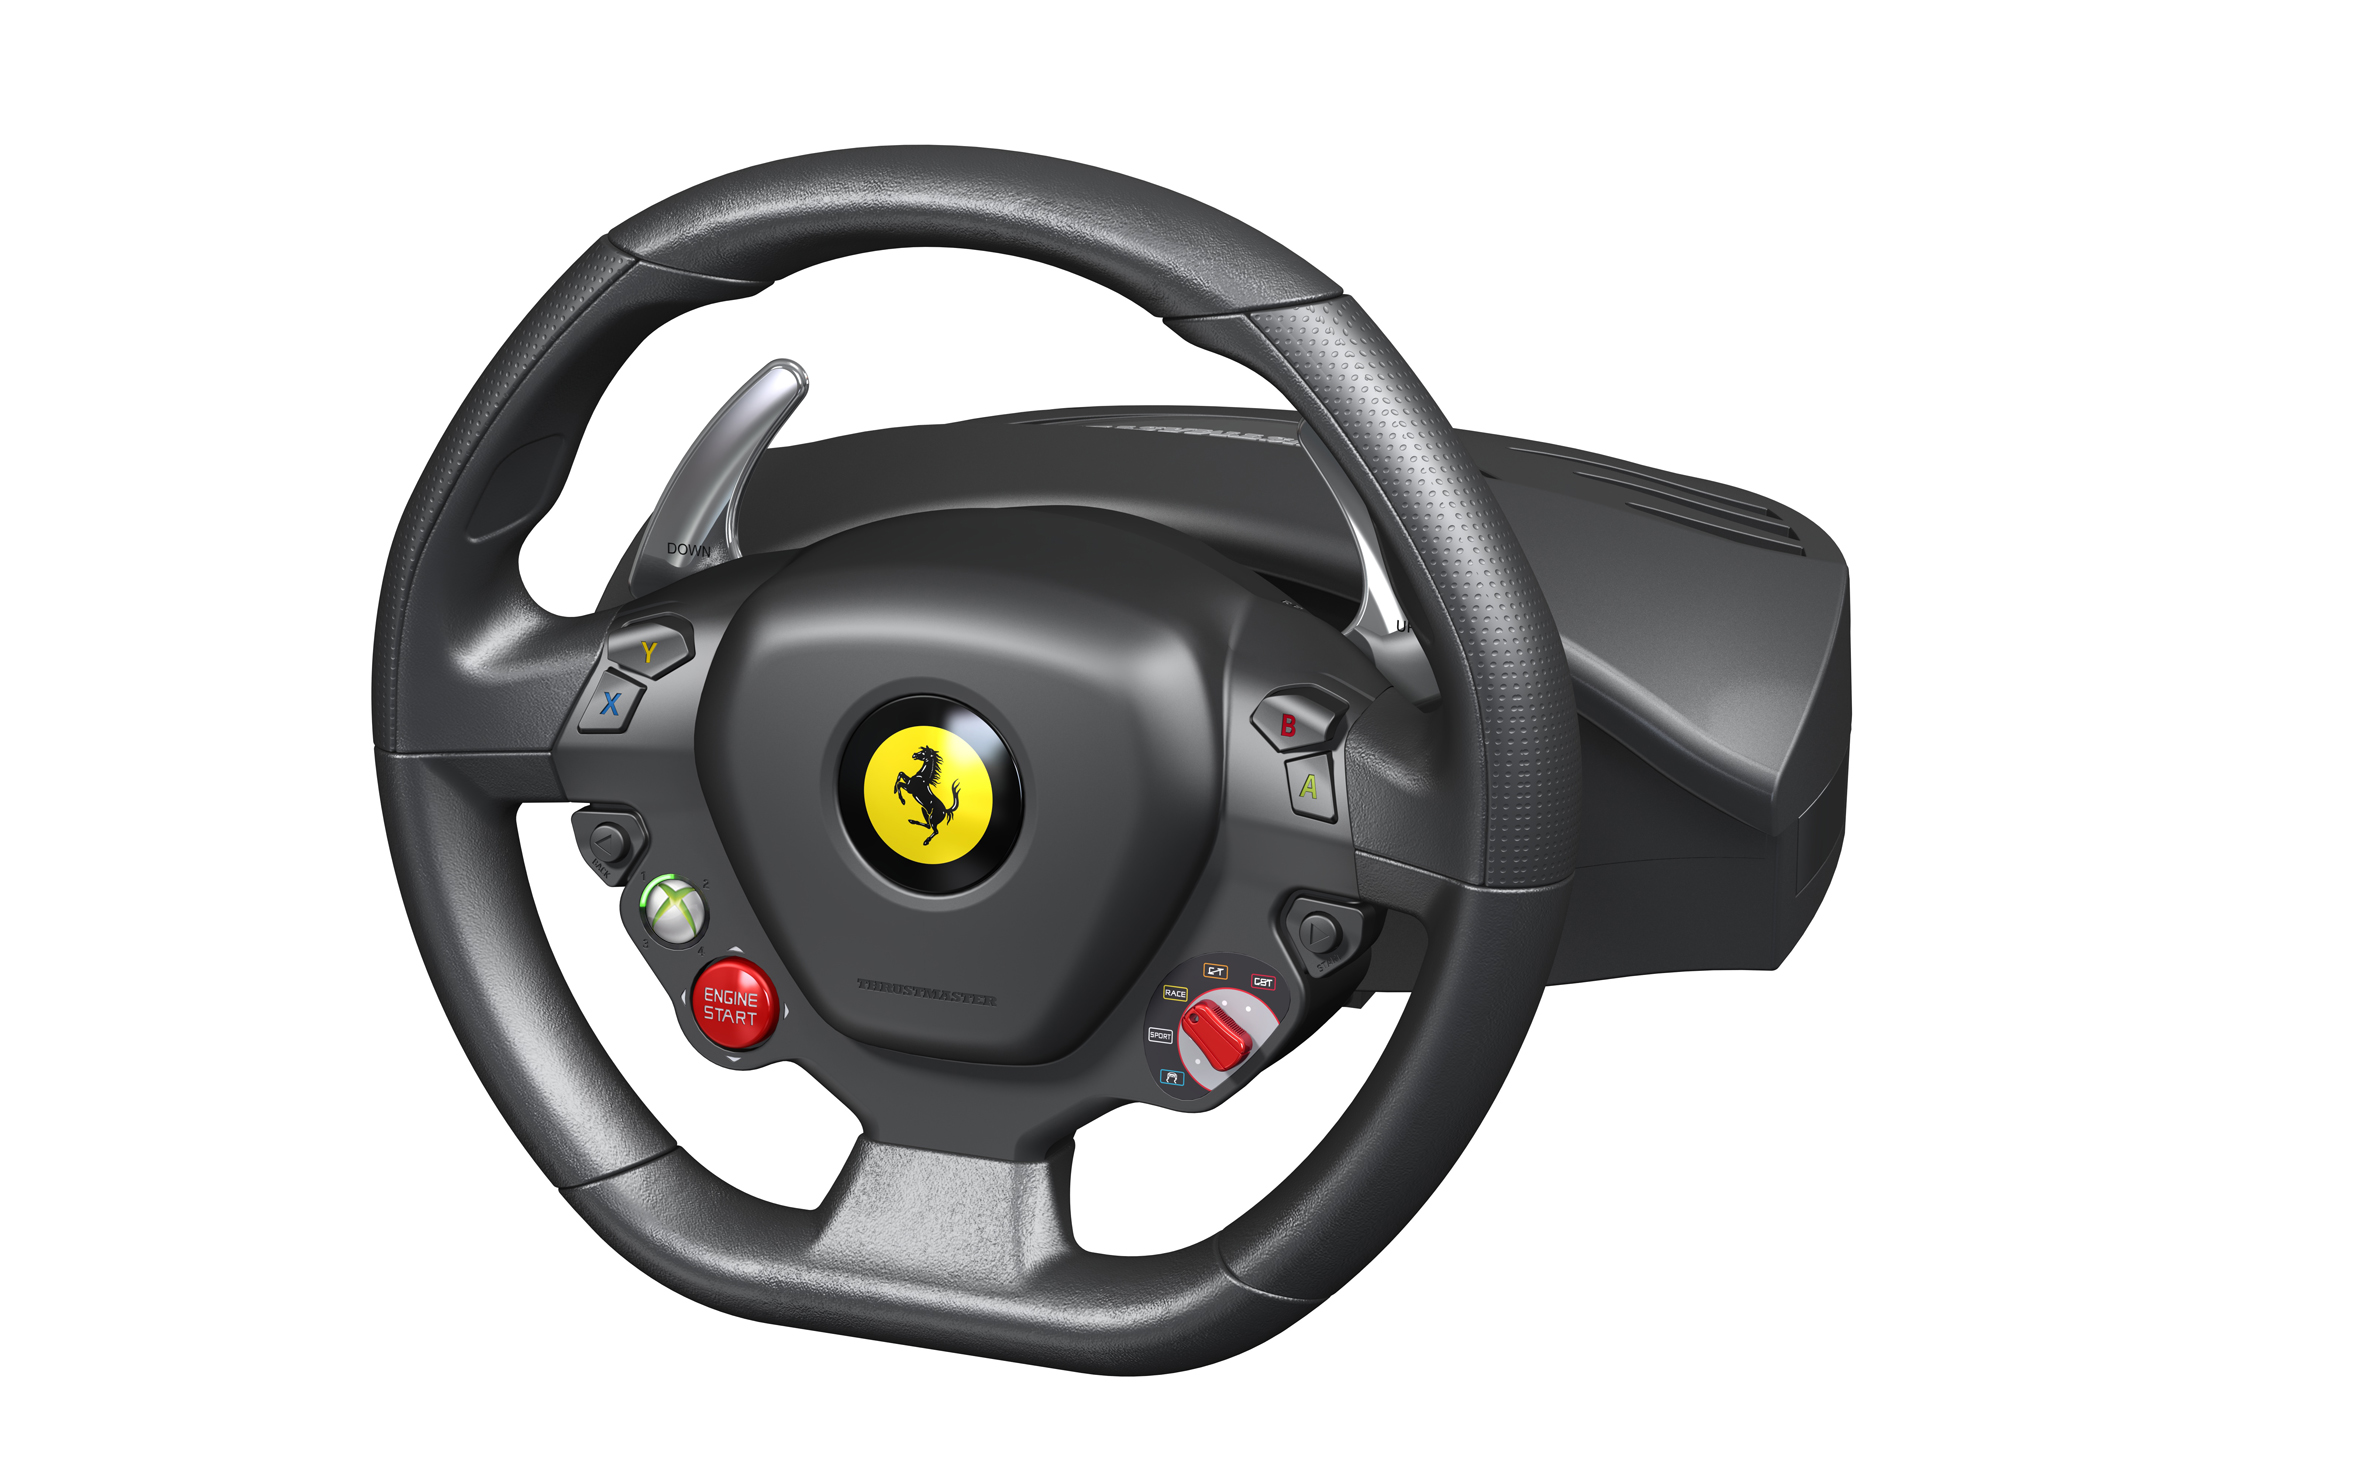 Thrustmaster TX Xbox One wheel will also be compatible for PC Team VVV